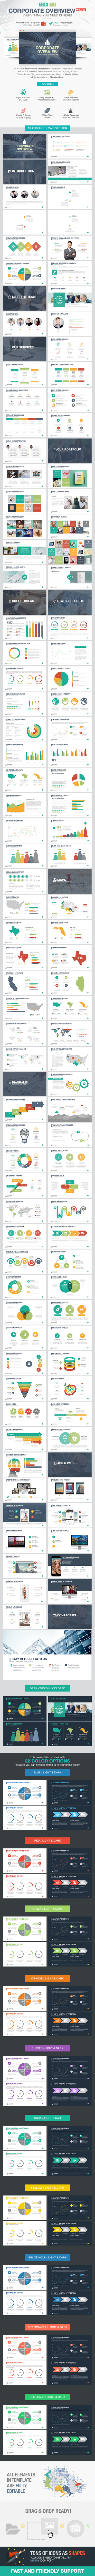 Powerpoint Pitch Template louis twelve keynote template Infographics Charts Statistics Annual Report Sales Commerce Start-up Idea Forbes Enterprise Entrepreneur Company Profile PPT PPTX THMX Minimal Modern Clean portfolio vector icons Analytics SEO Corporate social media marketing